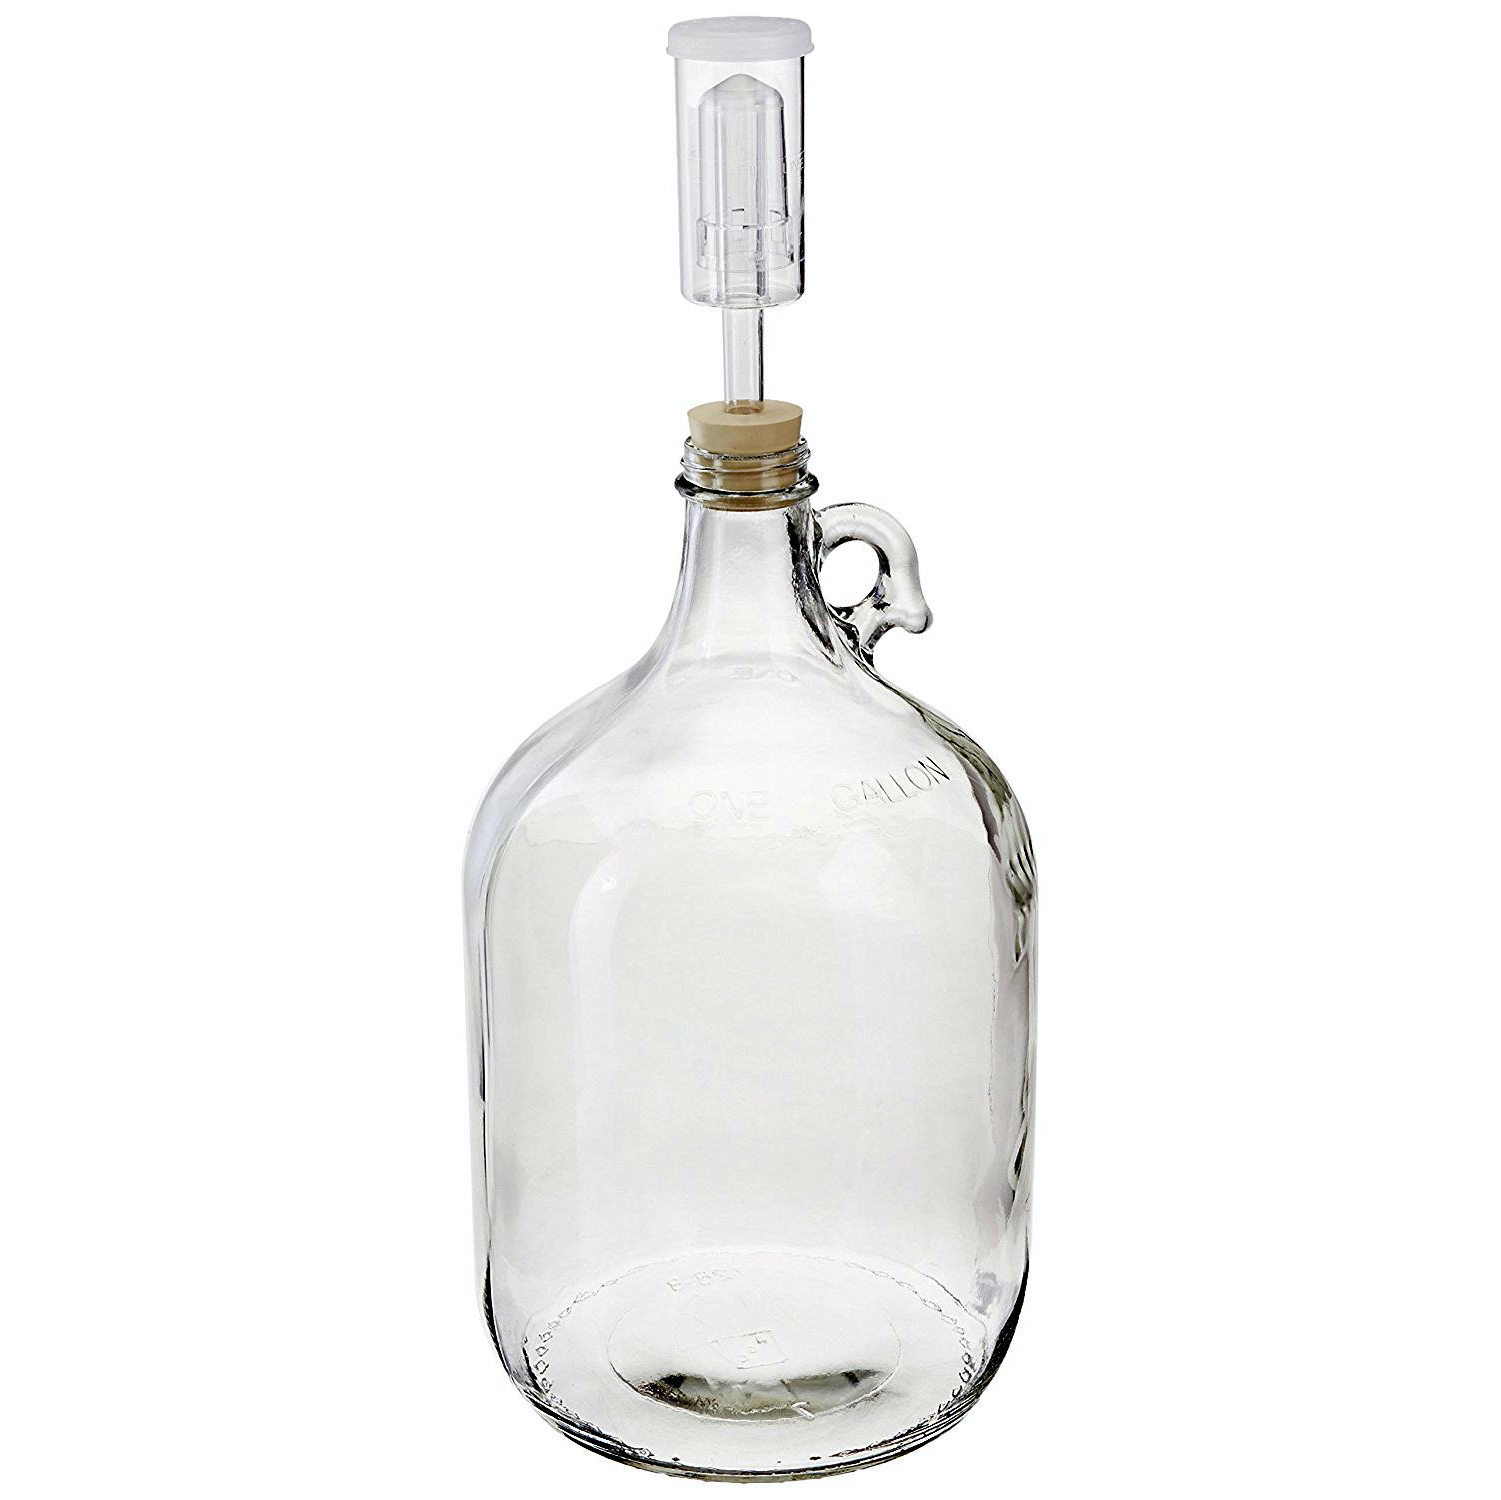 1 Gallon Small Batch Homebrew Fermentation Kit includes Glass Fermenter Jug Carboy with Handle, Rubber Stopper & 3-Piece Airlock